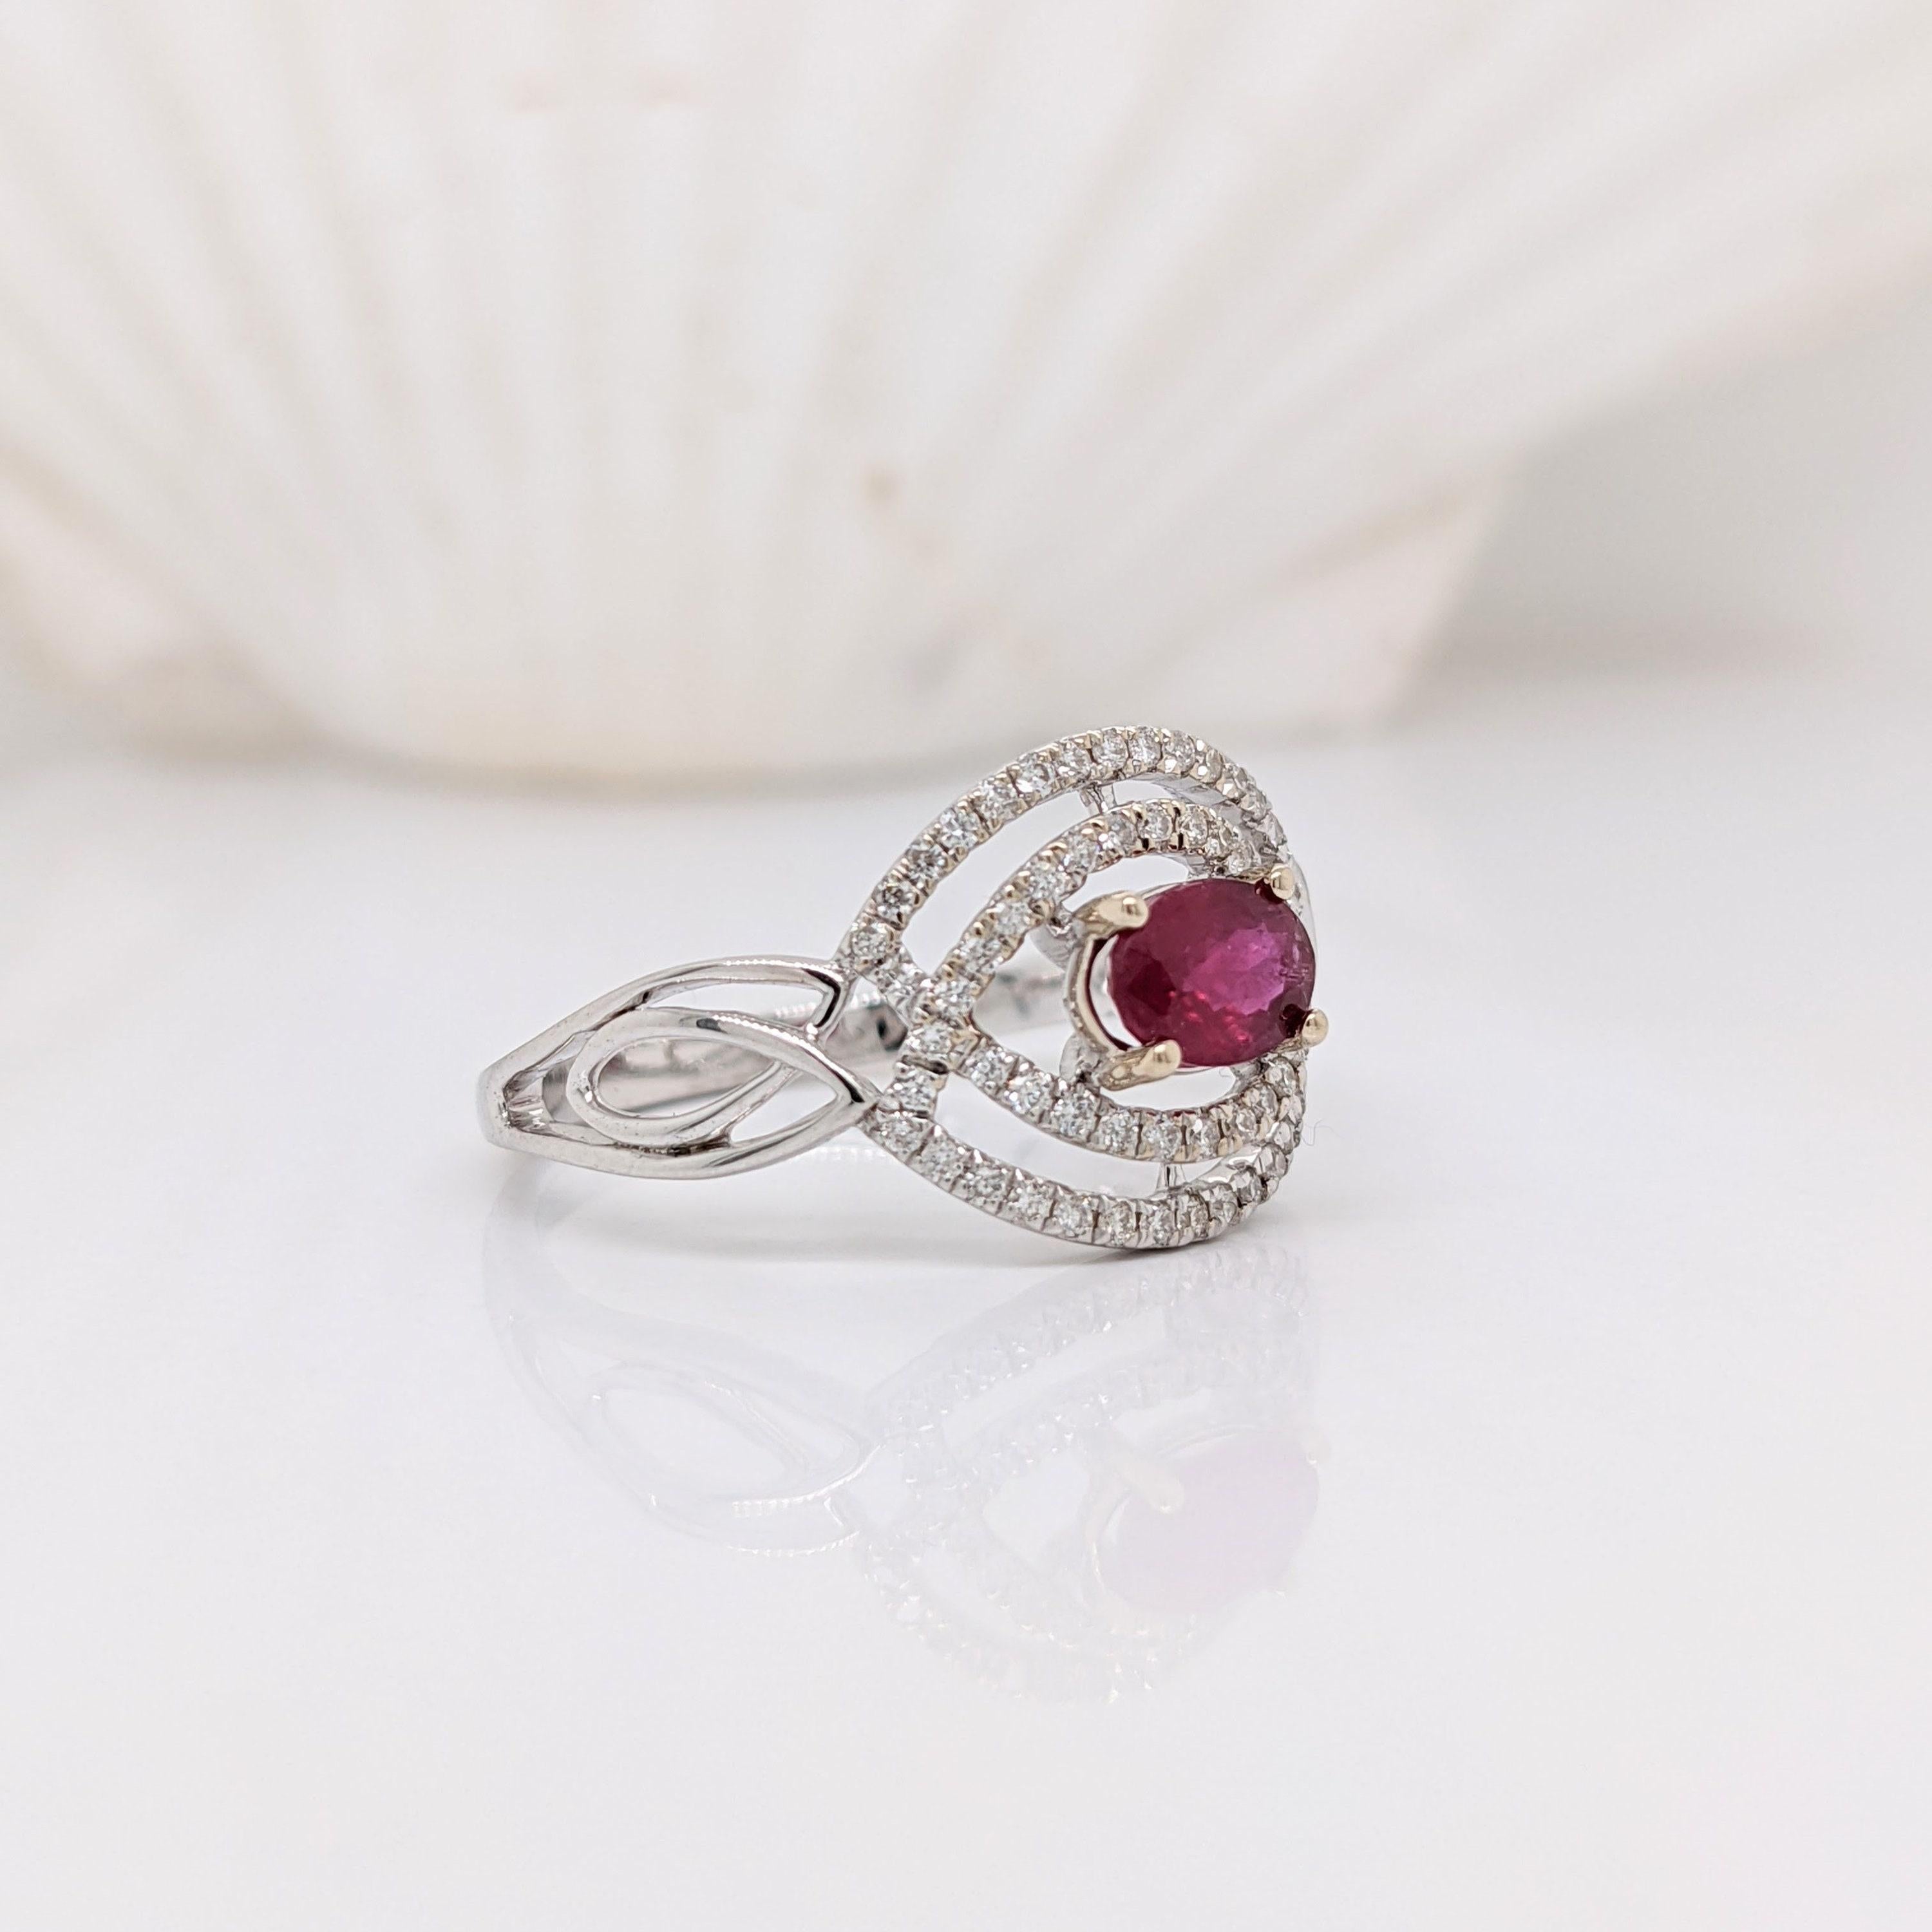 This beautiful ring features a 0.54 carat oval east west ruby gemstone with natural earth mined diamonds all set in solid 14K gold. A gorgeous ring to showcase this gorgeous ruby gemstone!

Specifications

Item Type: Ring
Center